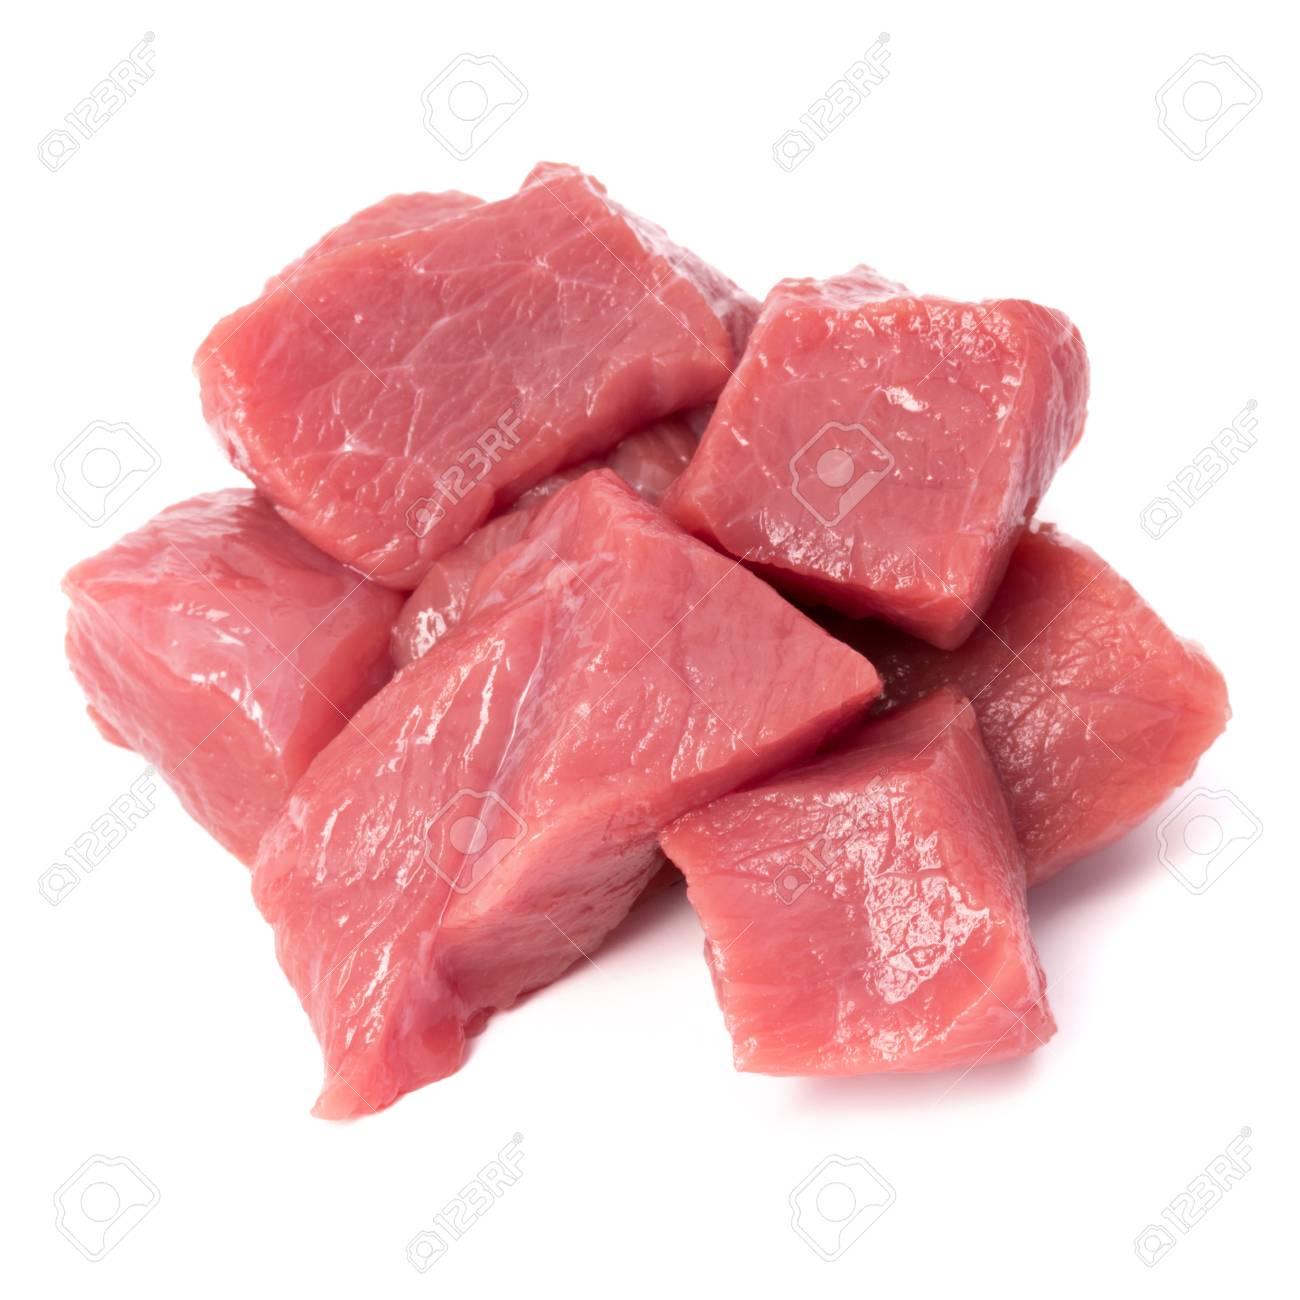 Raw Chopped Beef Meat Pieces Isolated Om White Background Cut